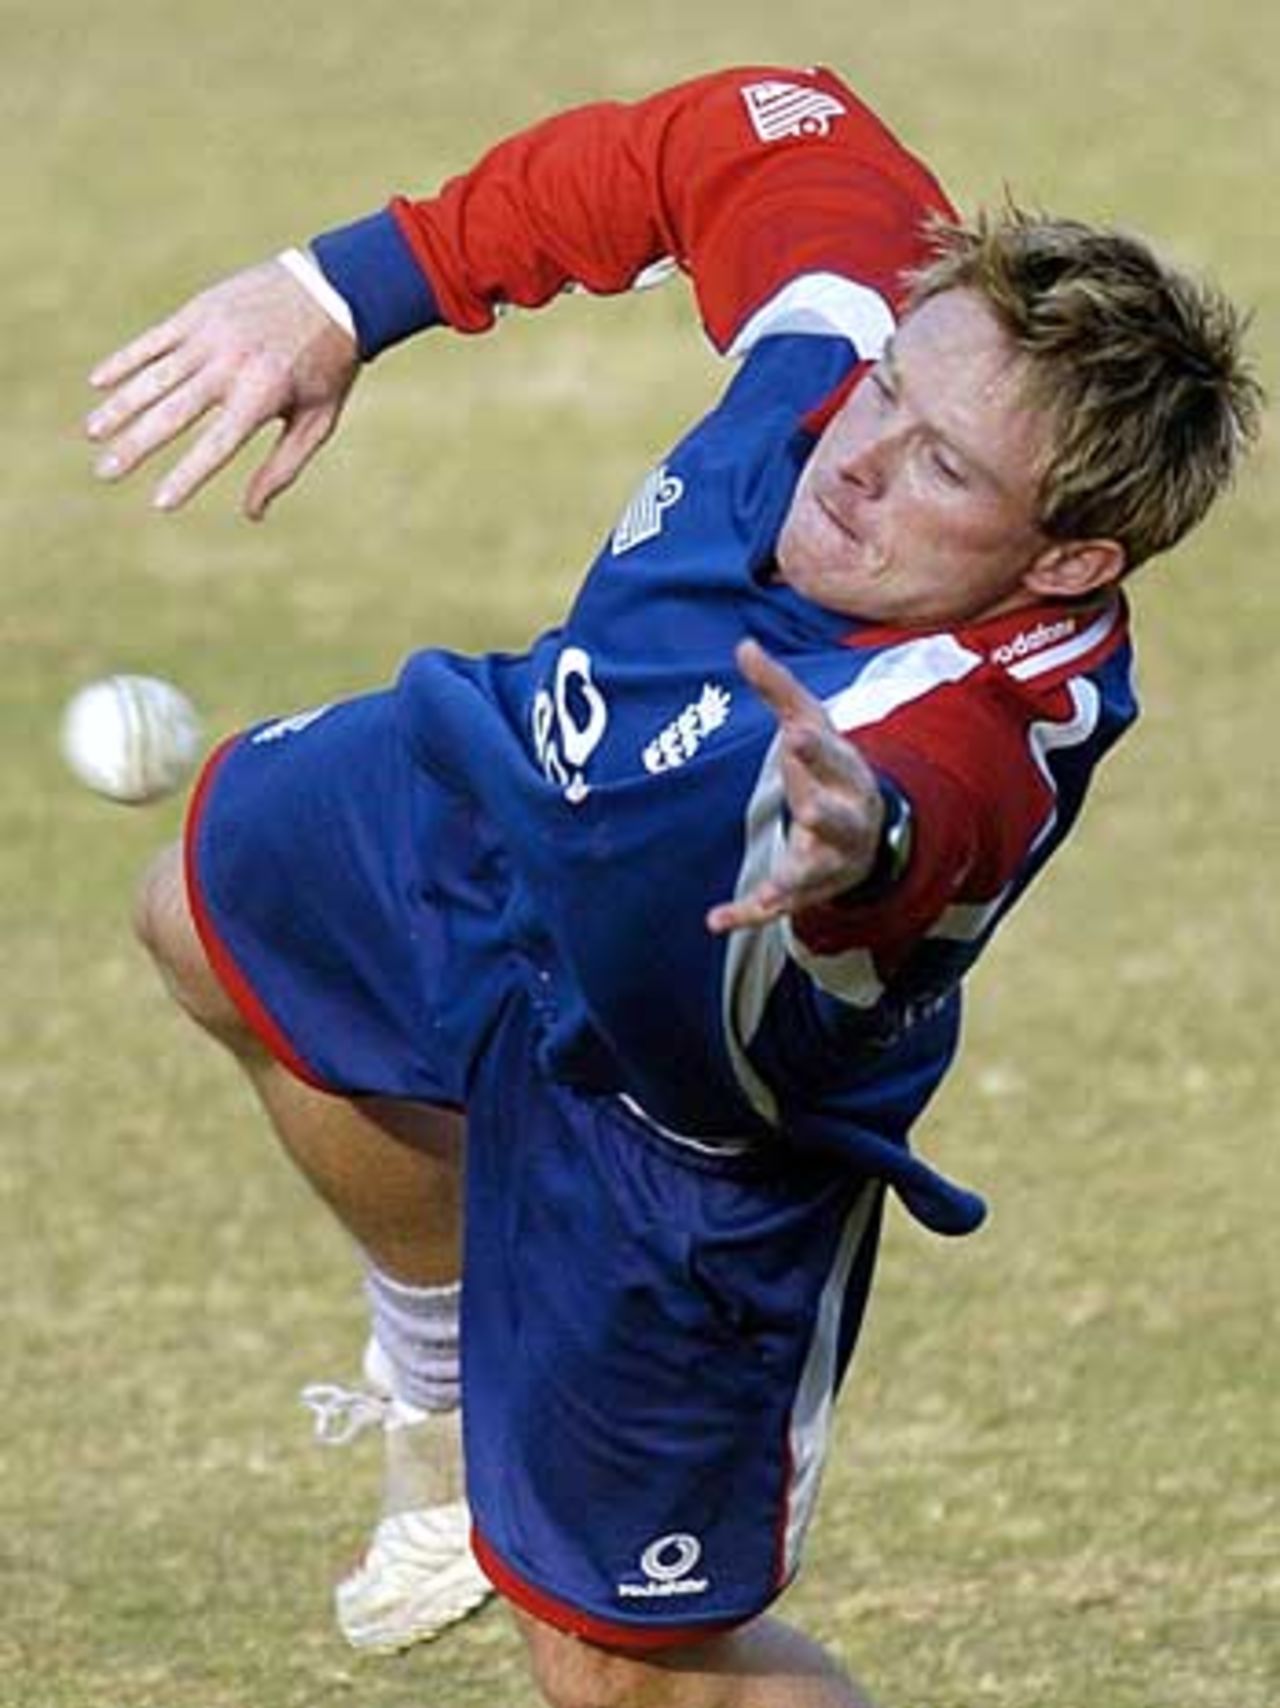 Ian Bell dives for a catch during England's fielding session, Lahore, December 8, 2005